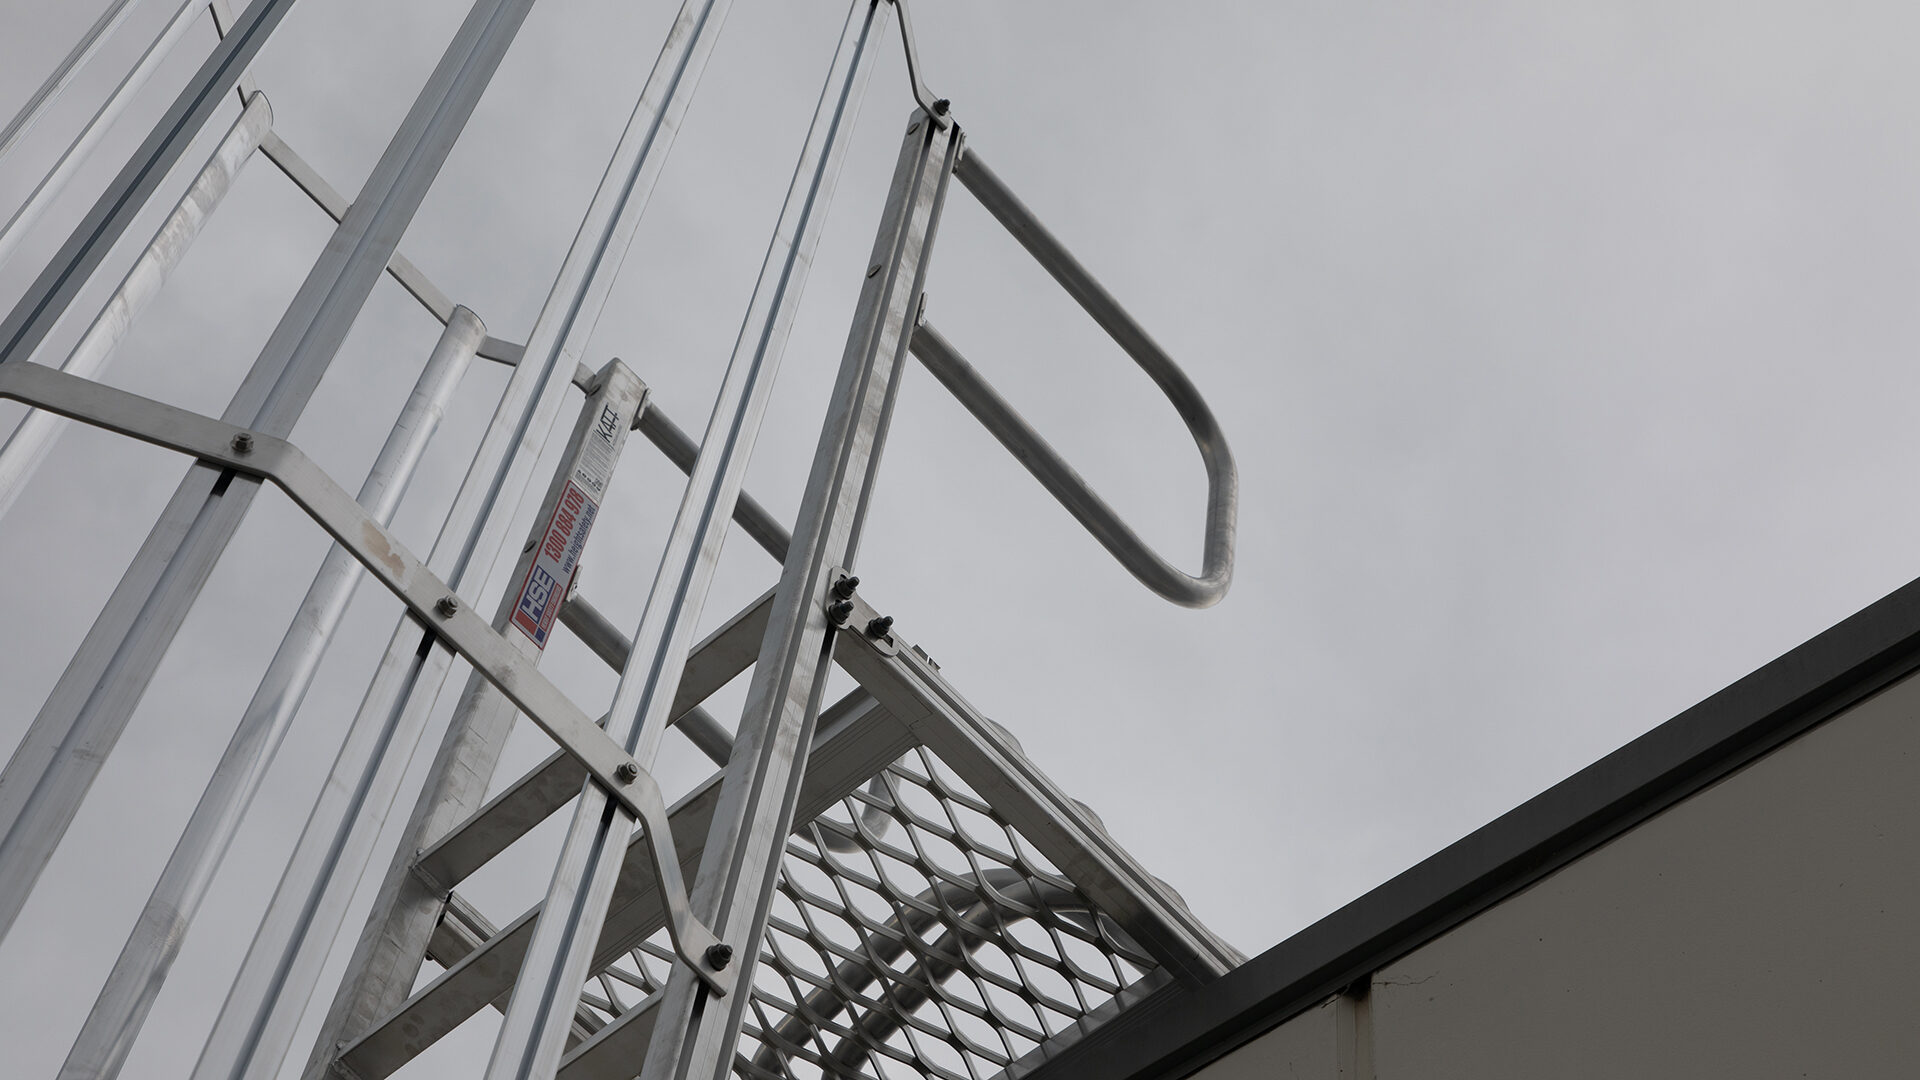 Fixed ladder leading to a landing platform with grab rails.